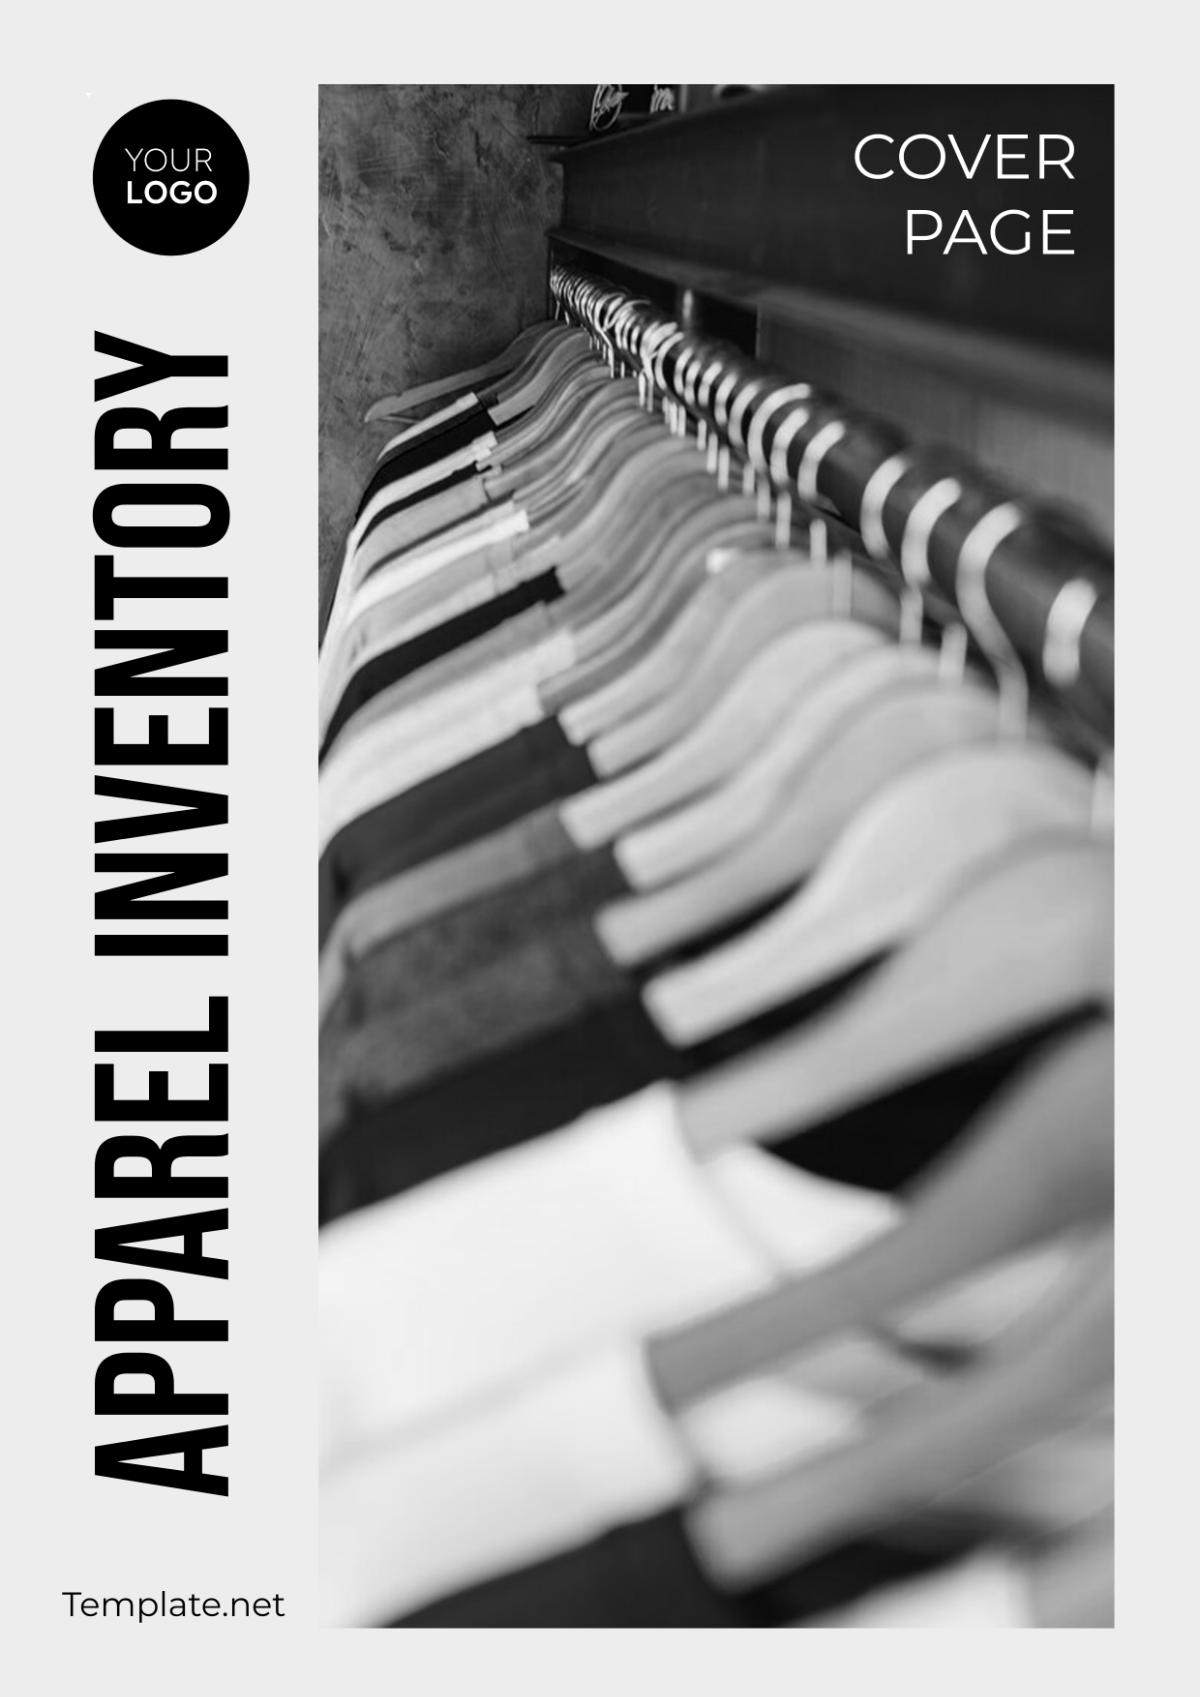 Apparel Inventory Cover Page Template